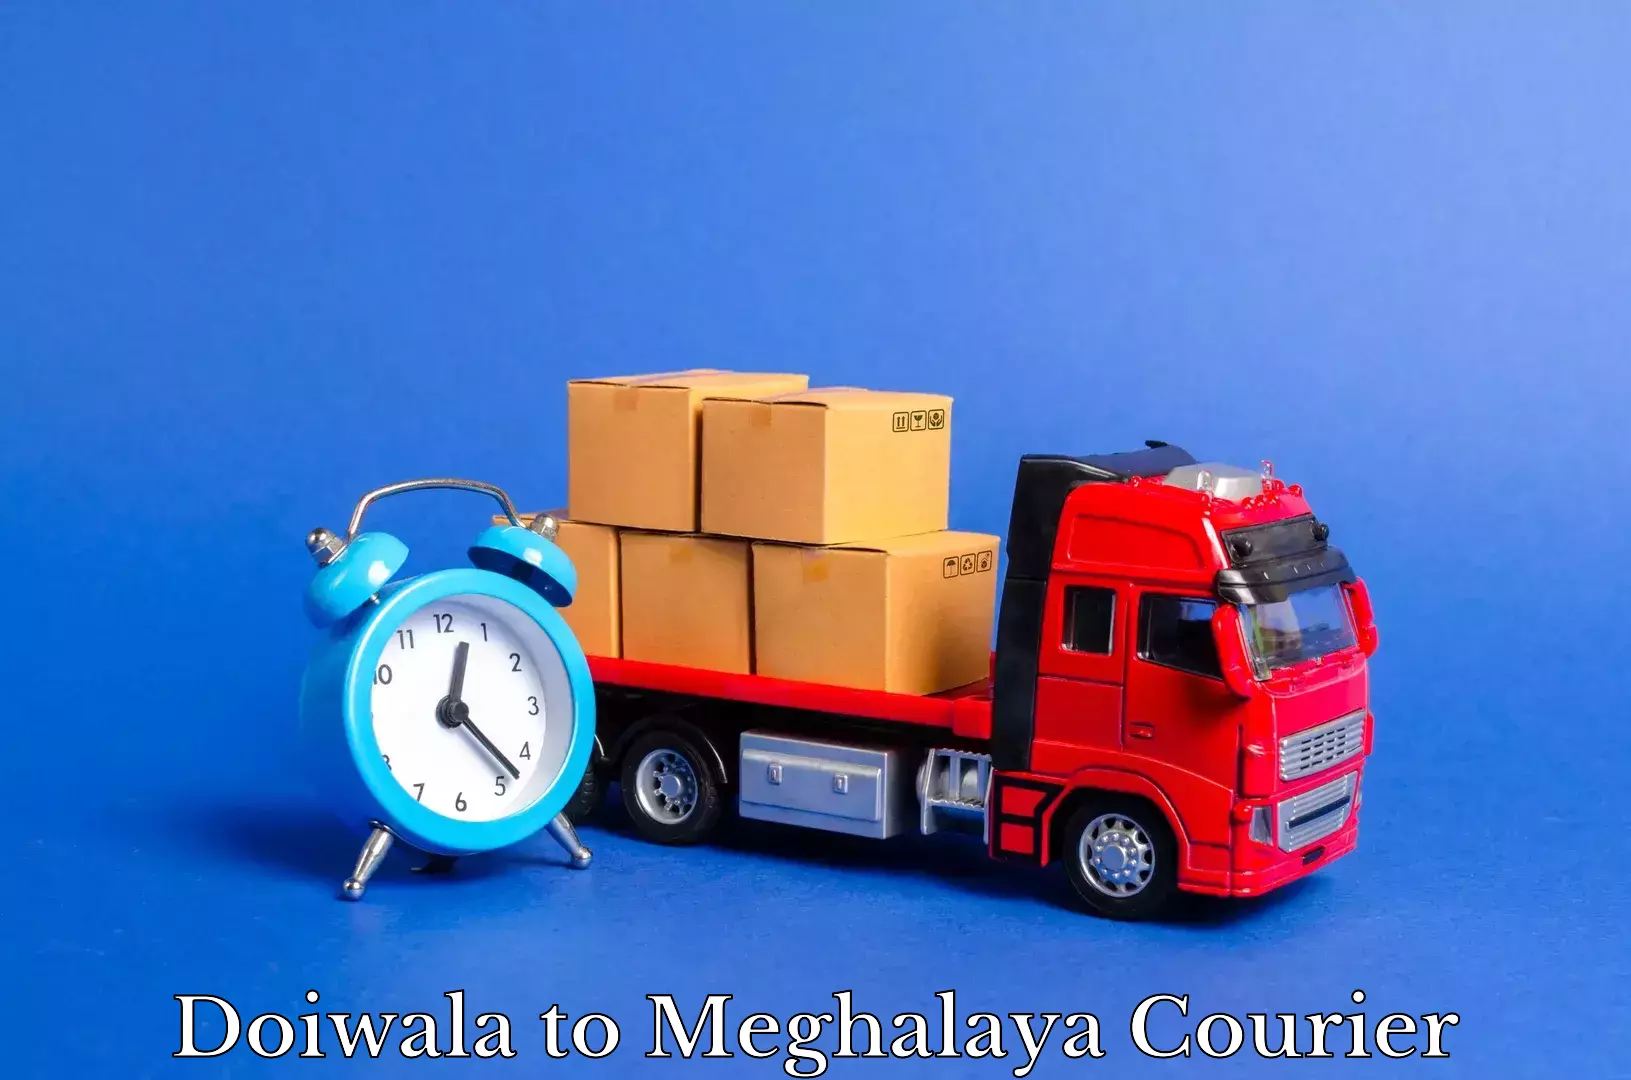 Furniture delivery service Doiwala to Tura